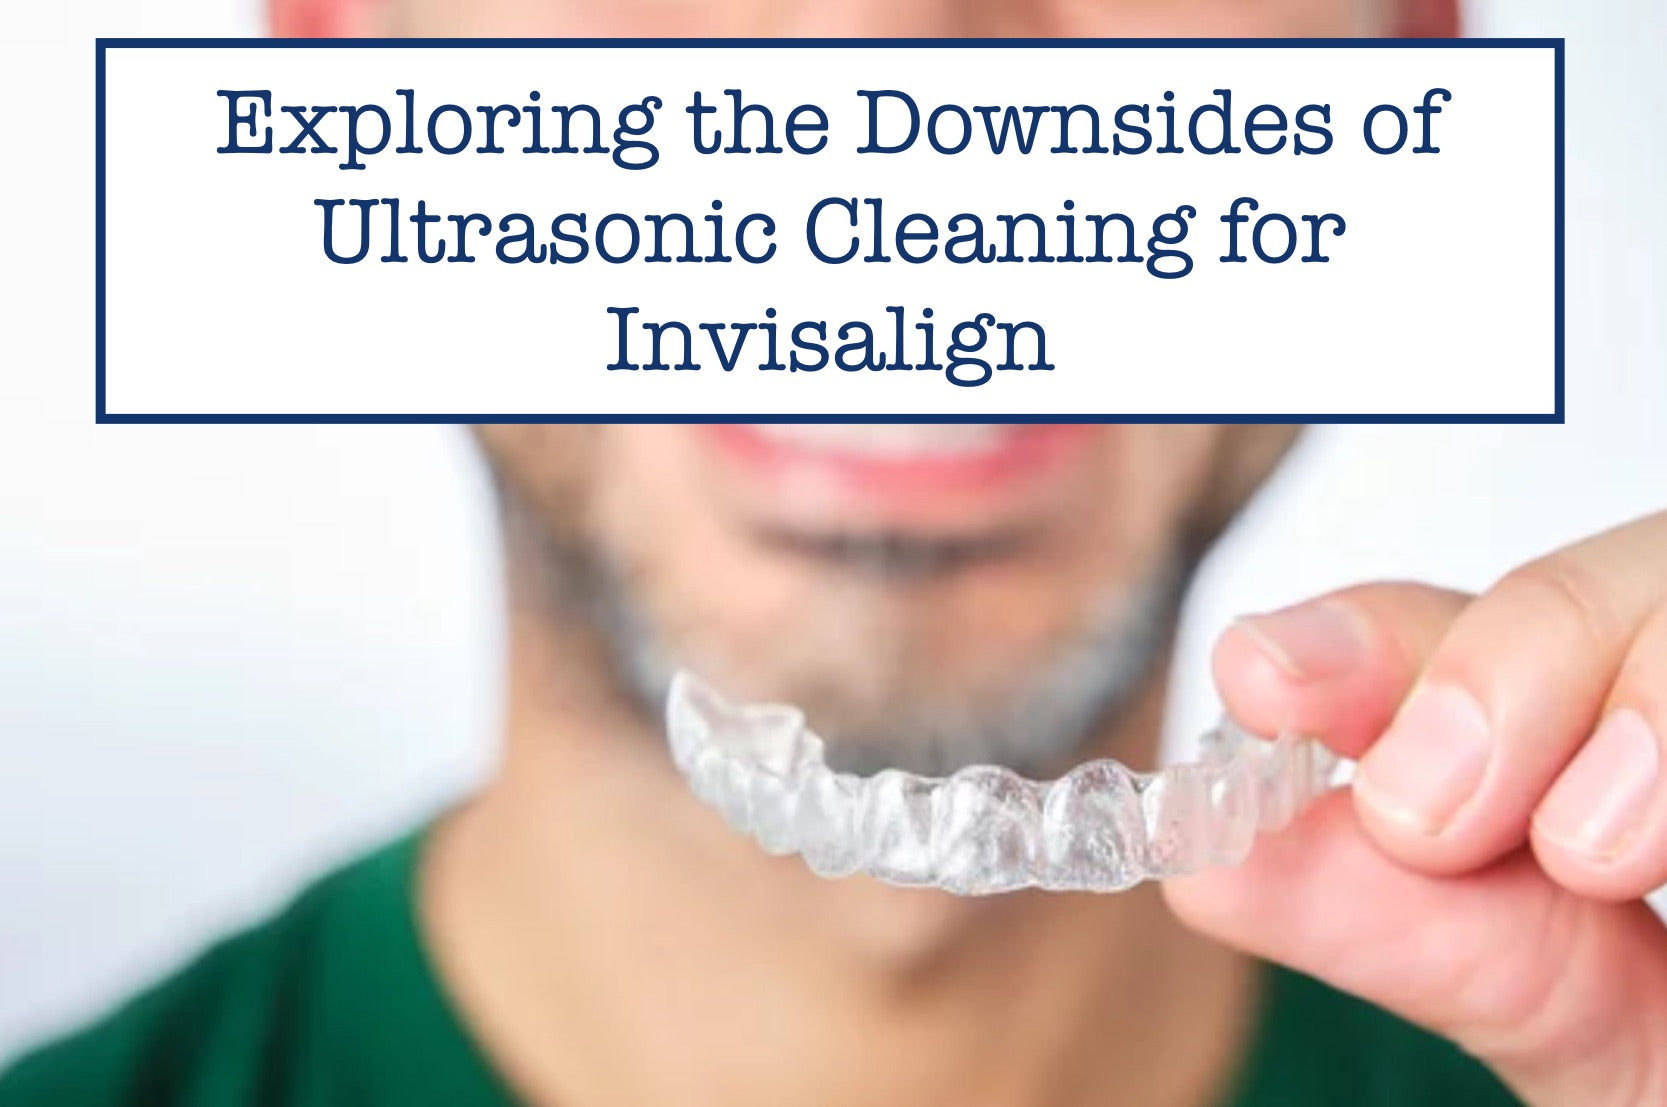 Exploring the Downsides of Ultrasonic Cleaning for Invisalign